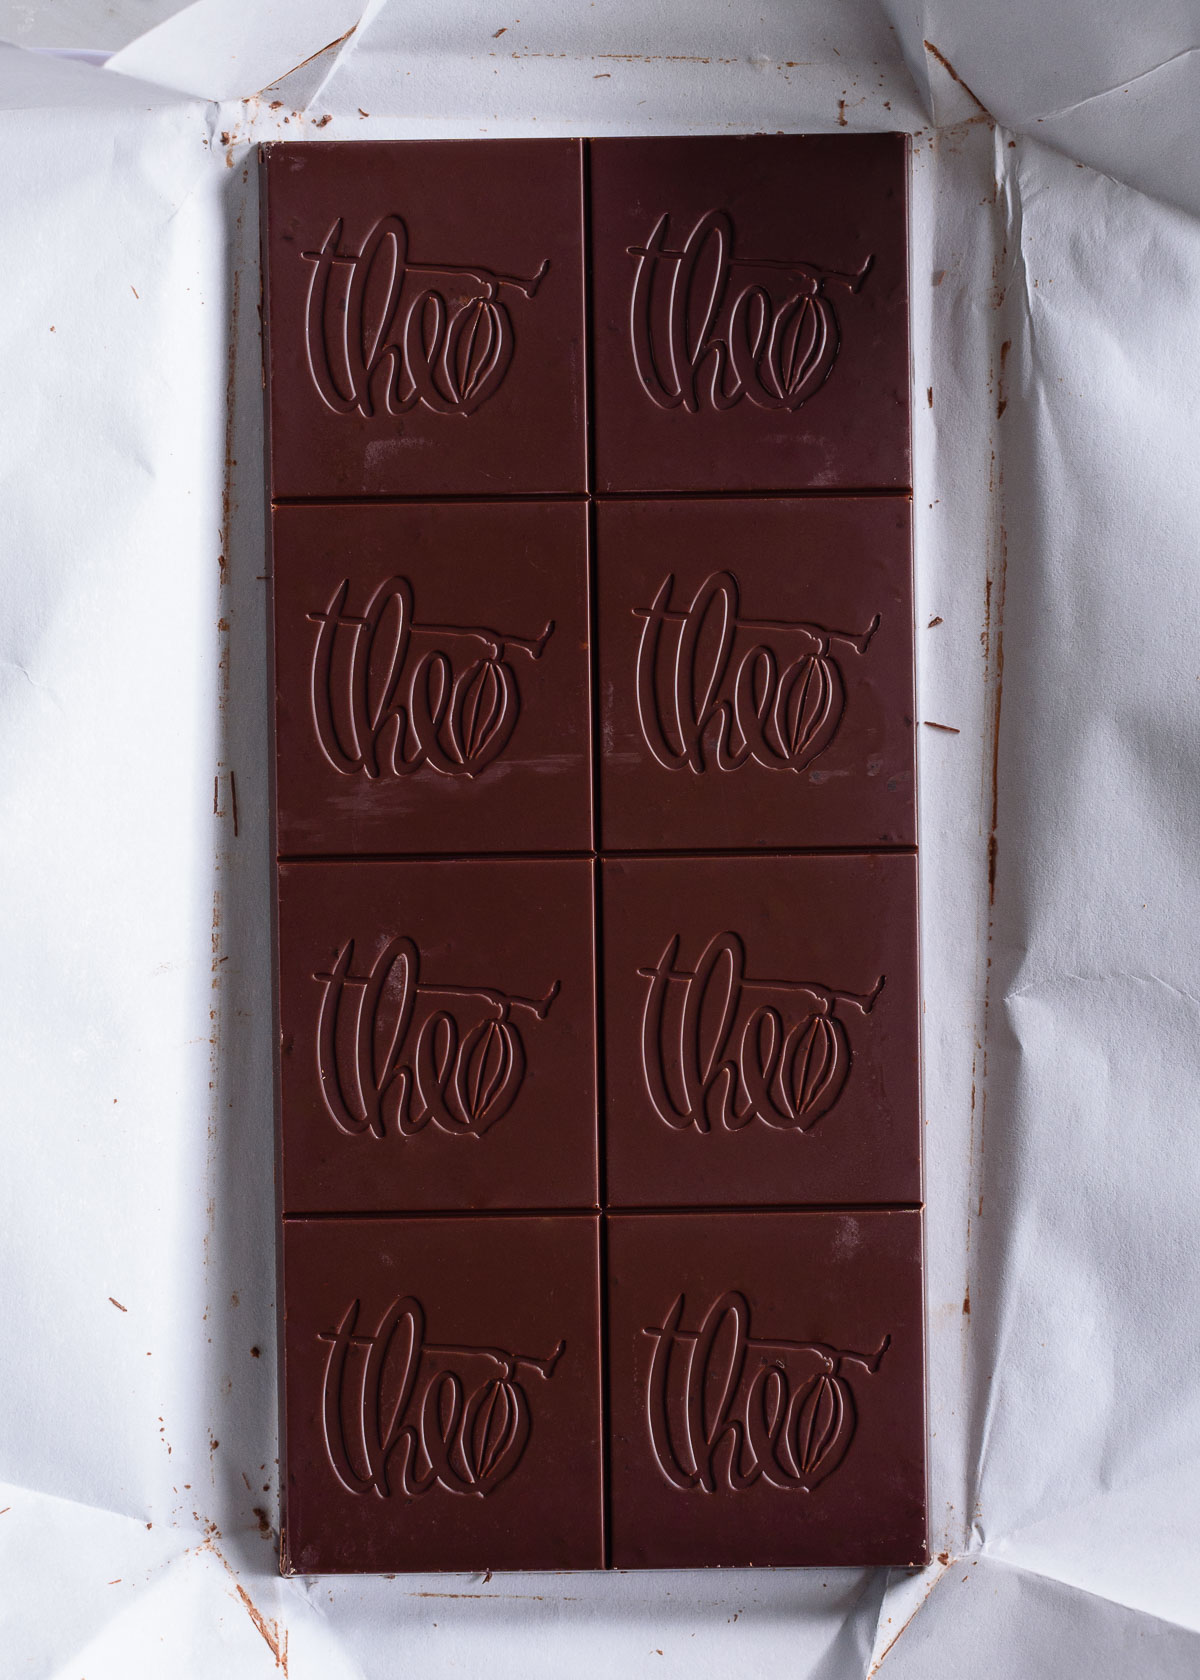 A close up of a dark chocolate baking bar from Theo Chocolate on top of a white wrapper.